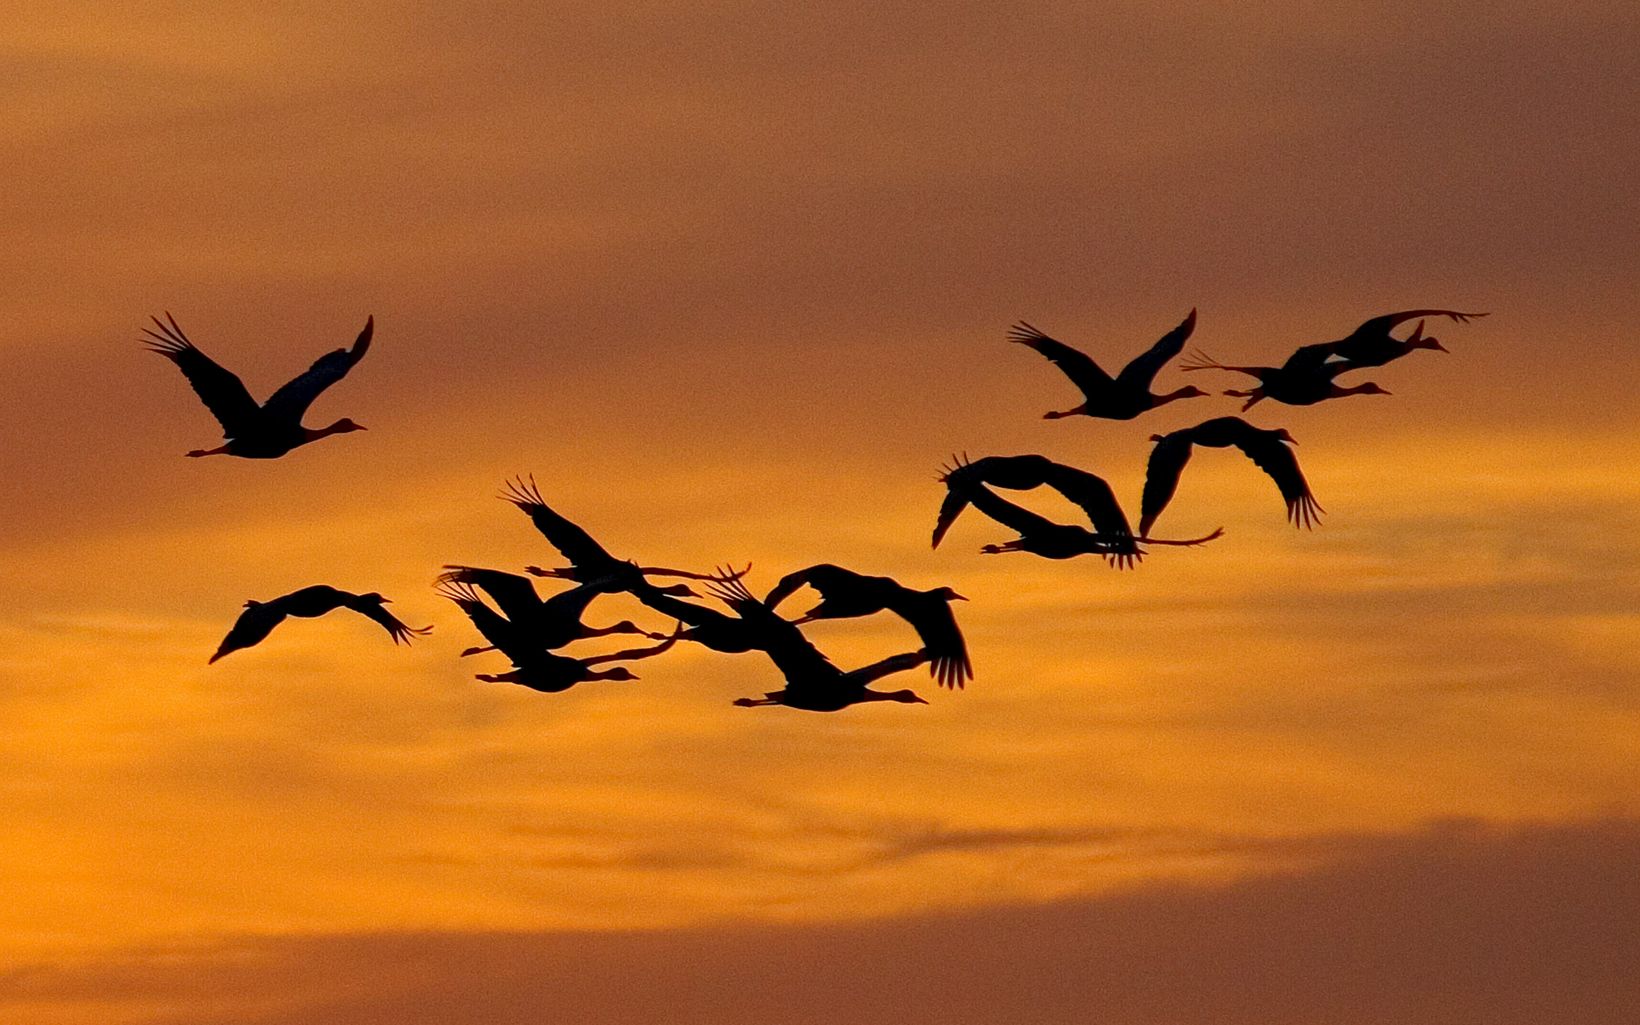 Sandhill cranes come to roost along the Platte River in Nebraska. © Chris Helzer/The Nature Conservancy